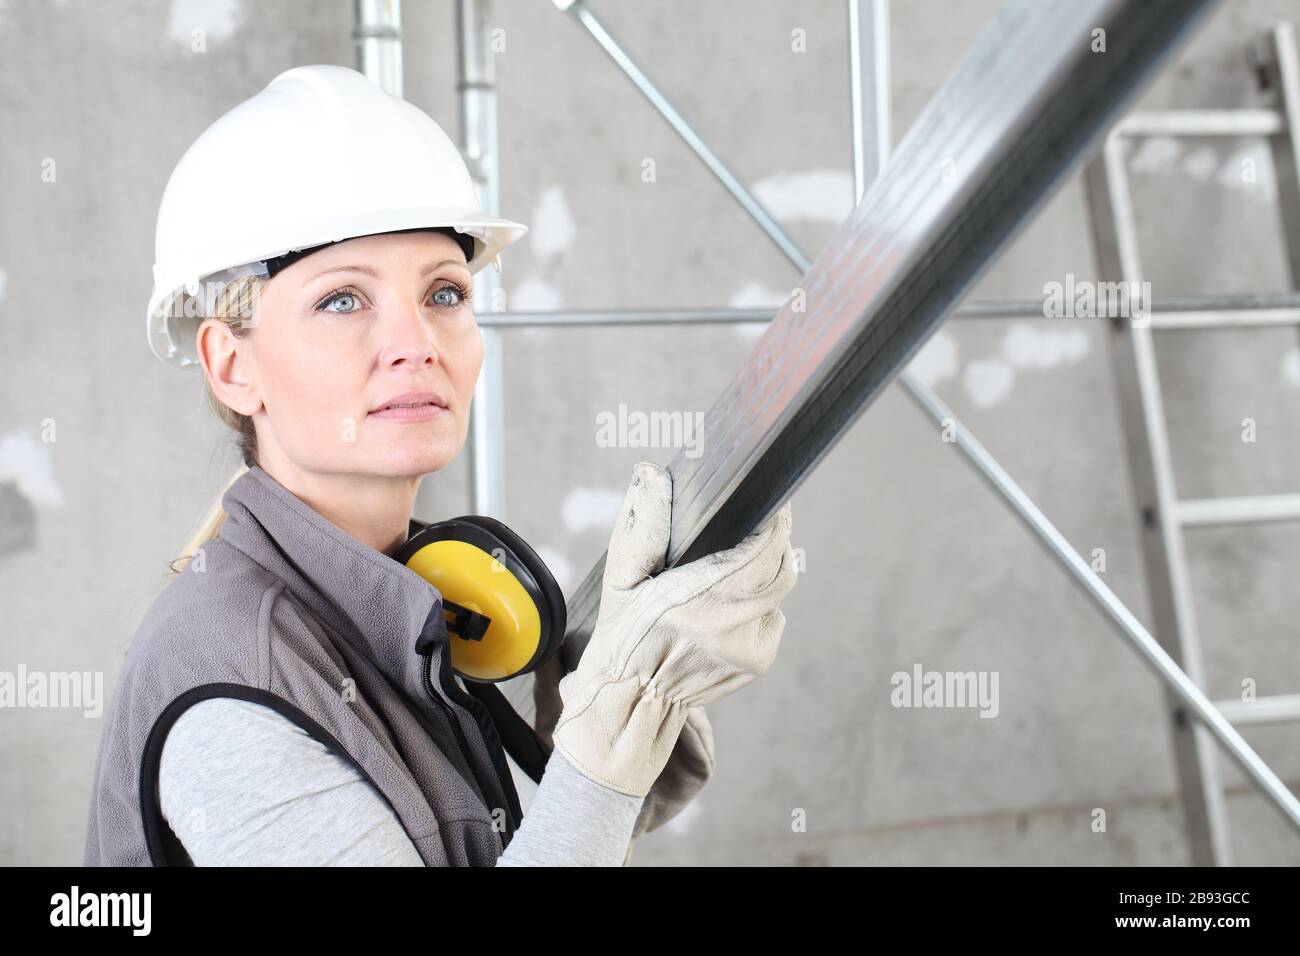 woman construction worker builder portrait wearing white helmet and hearing protection headphones, holding a metal stud for drywall on interior site b Stock Photo